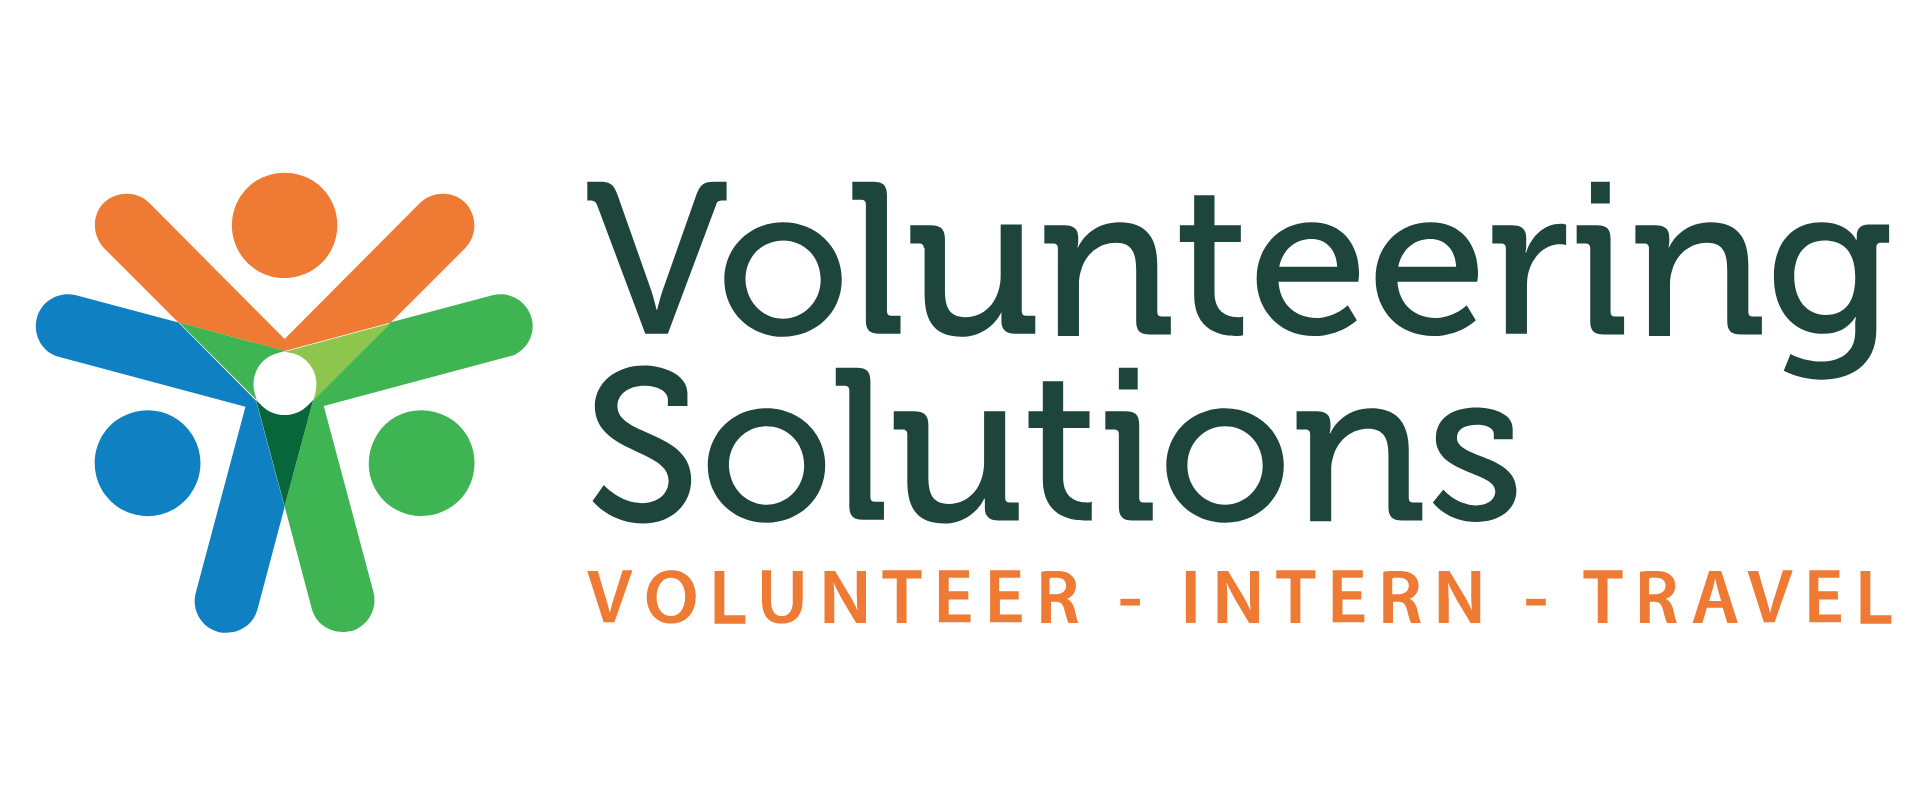 A Close Look at Volunteer Solutions: Fostering Change